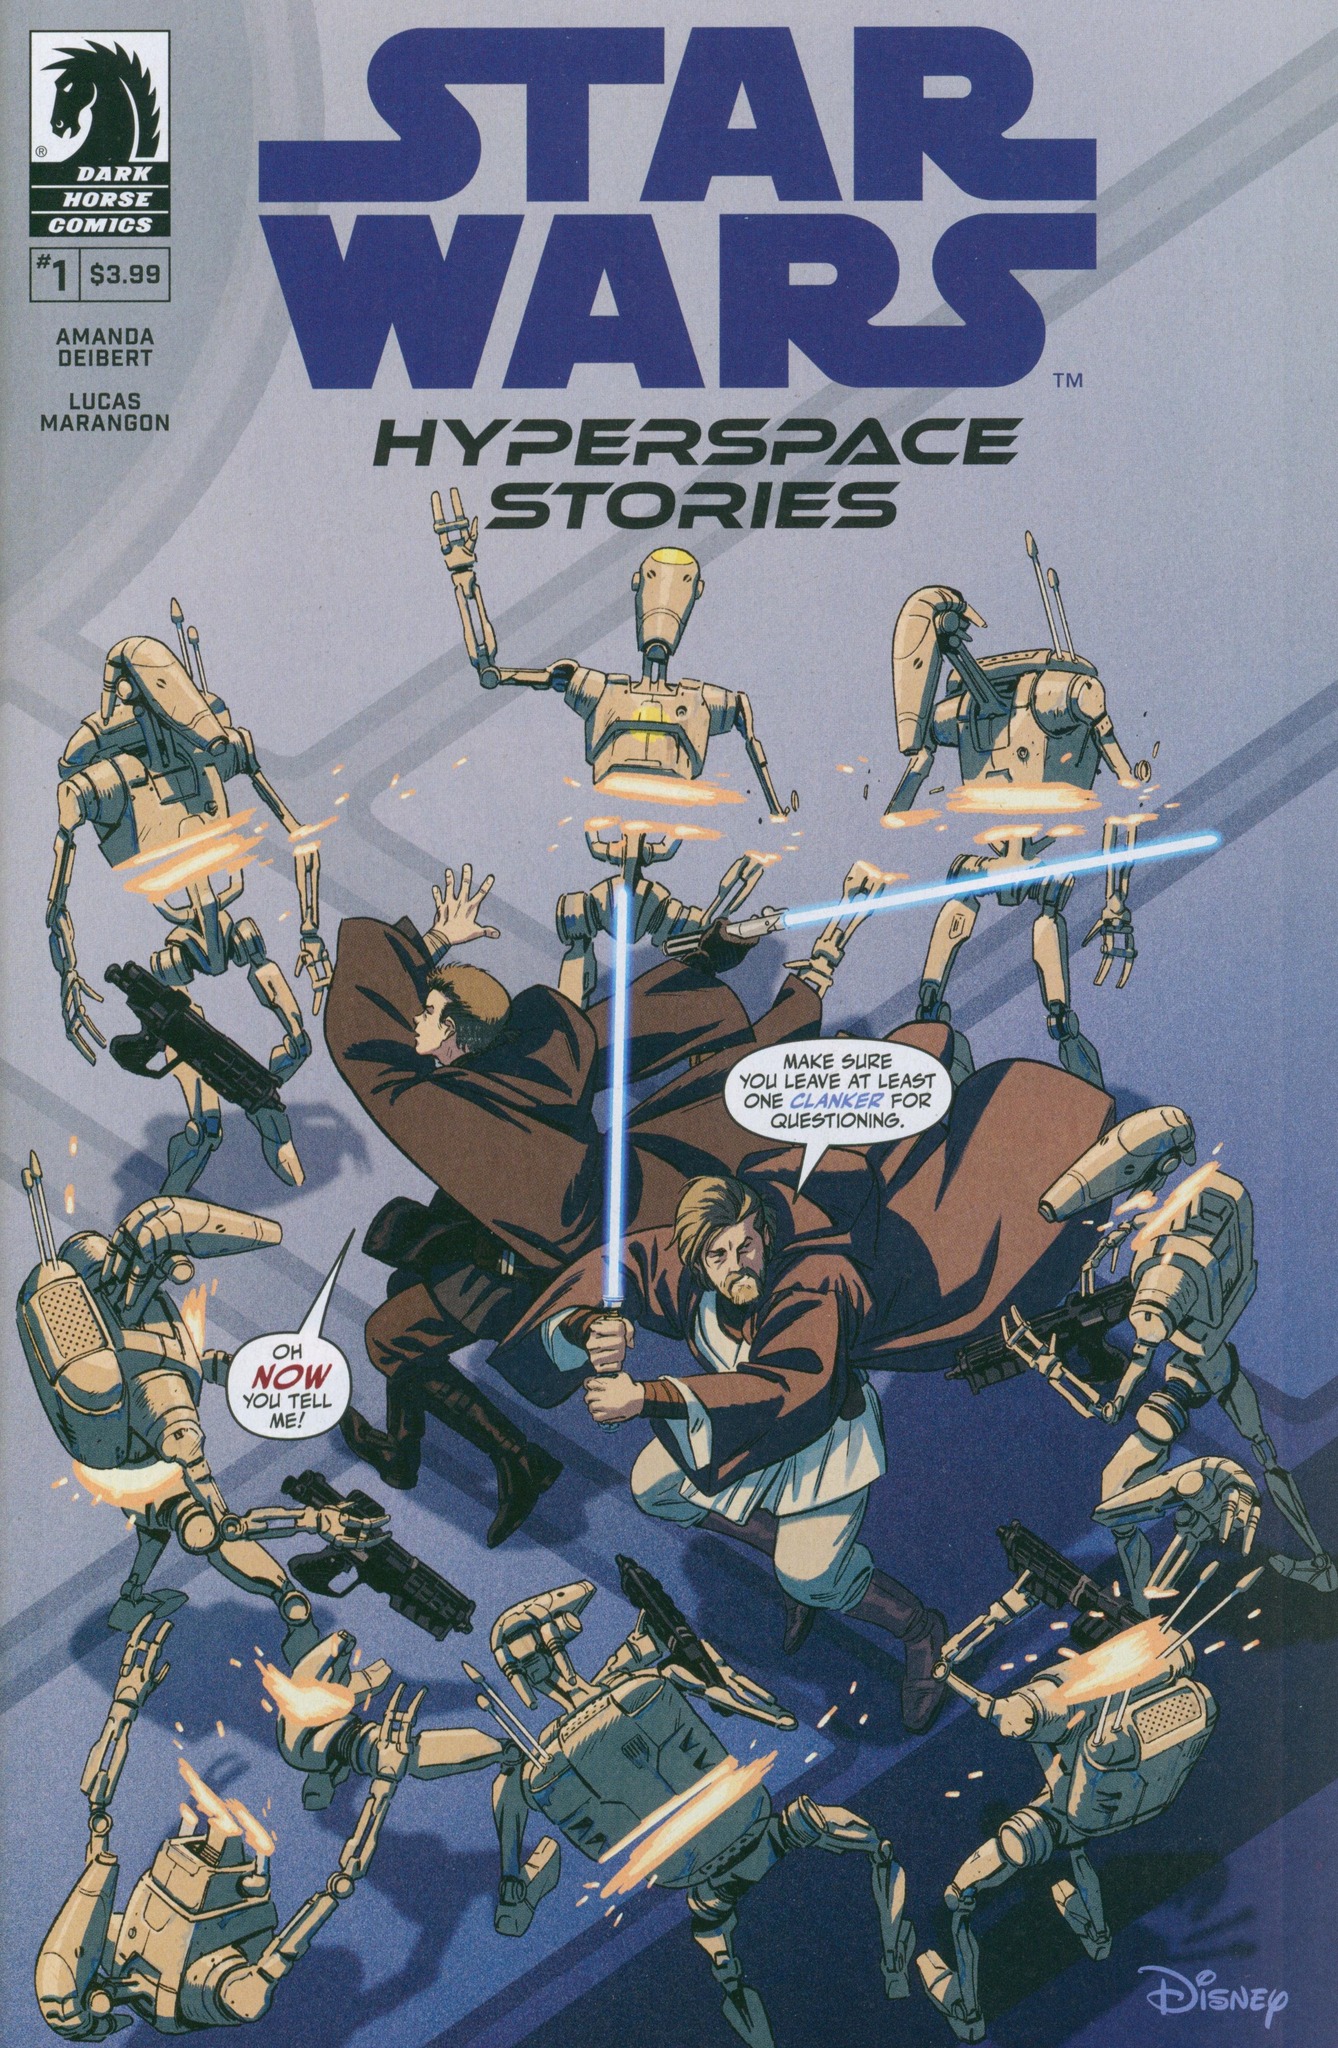 Hyperspace Stories #1 (Cover B by Miguel Valderrama) (Sommer 2022)